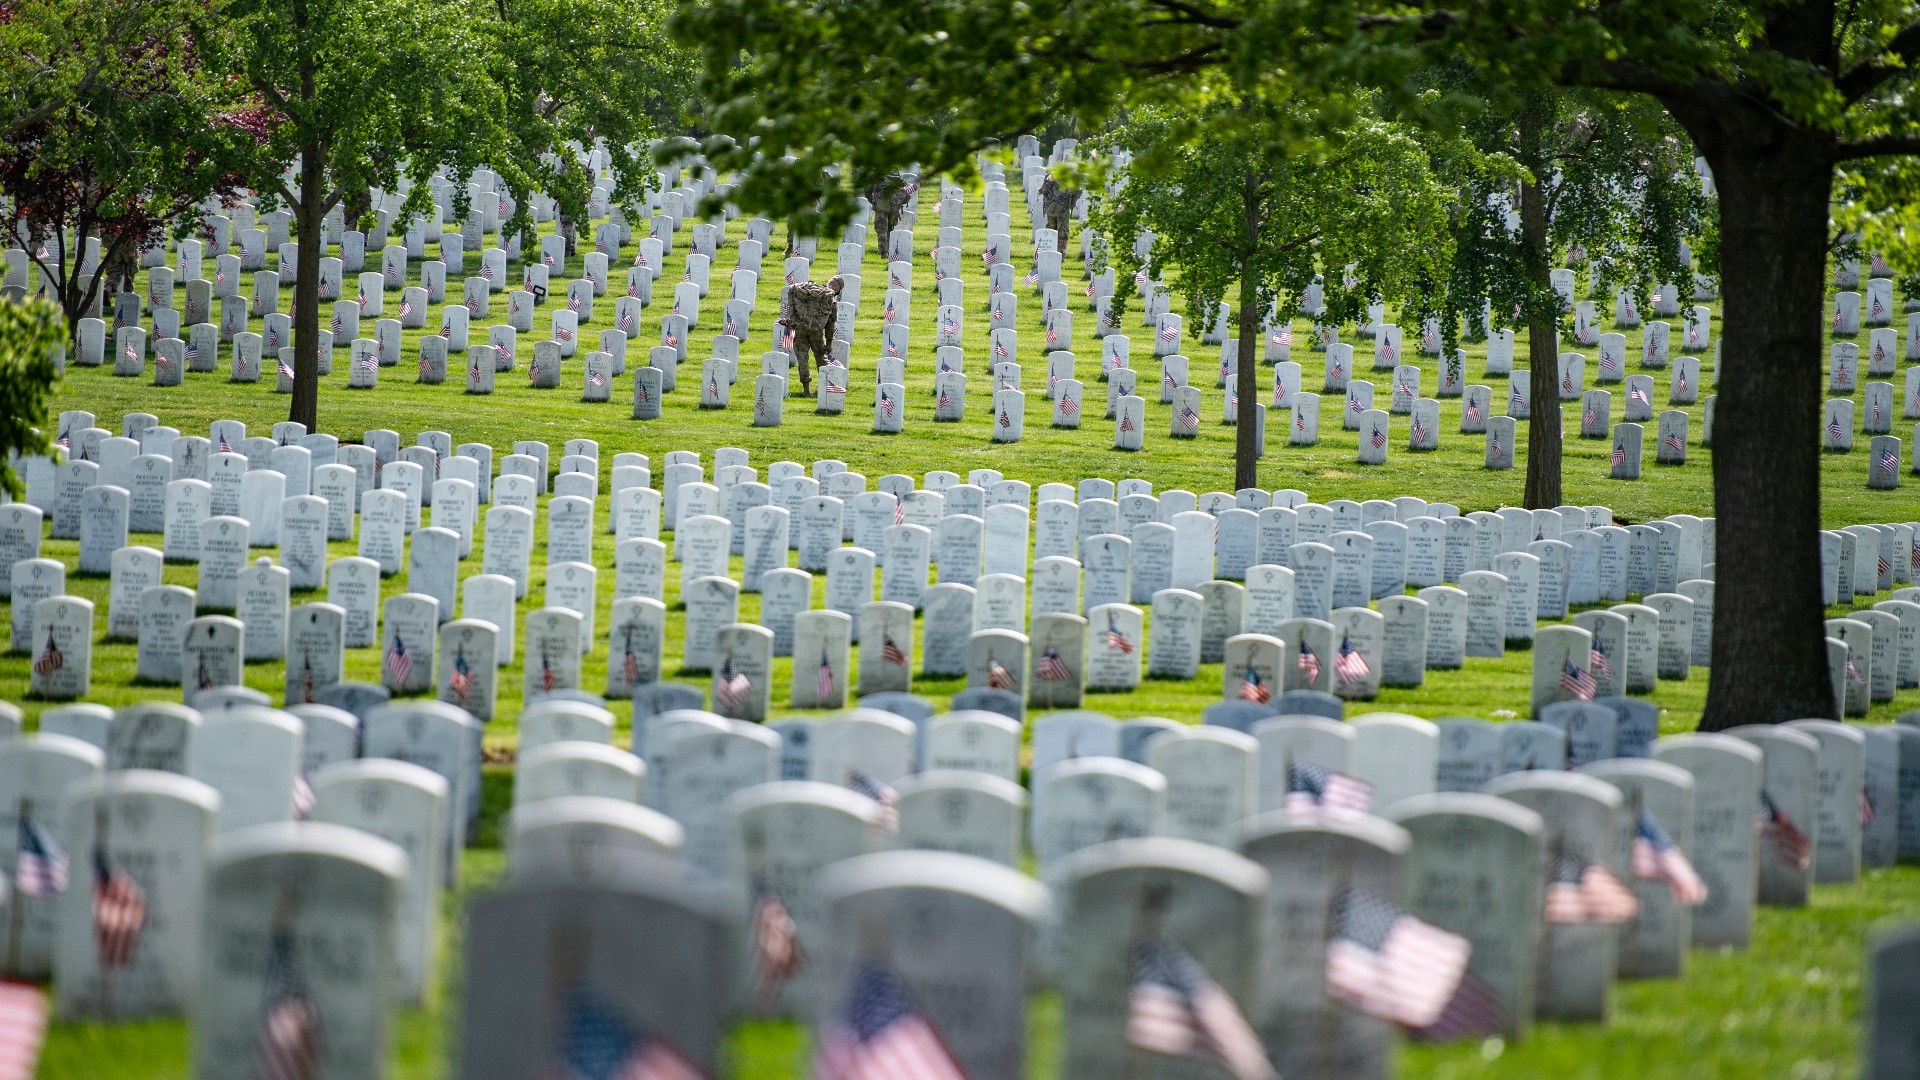 Memorial Day became a federal holiday in 1971 and is a day we take time to honor those who died while serving in the US military.